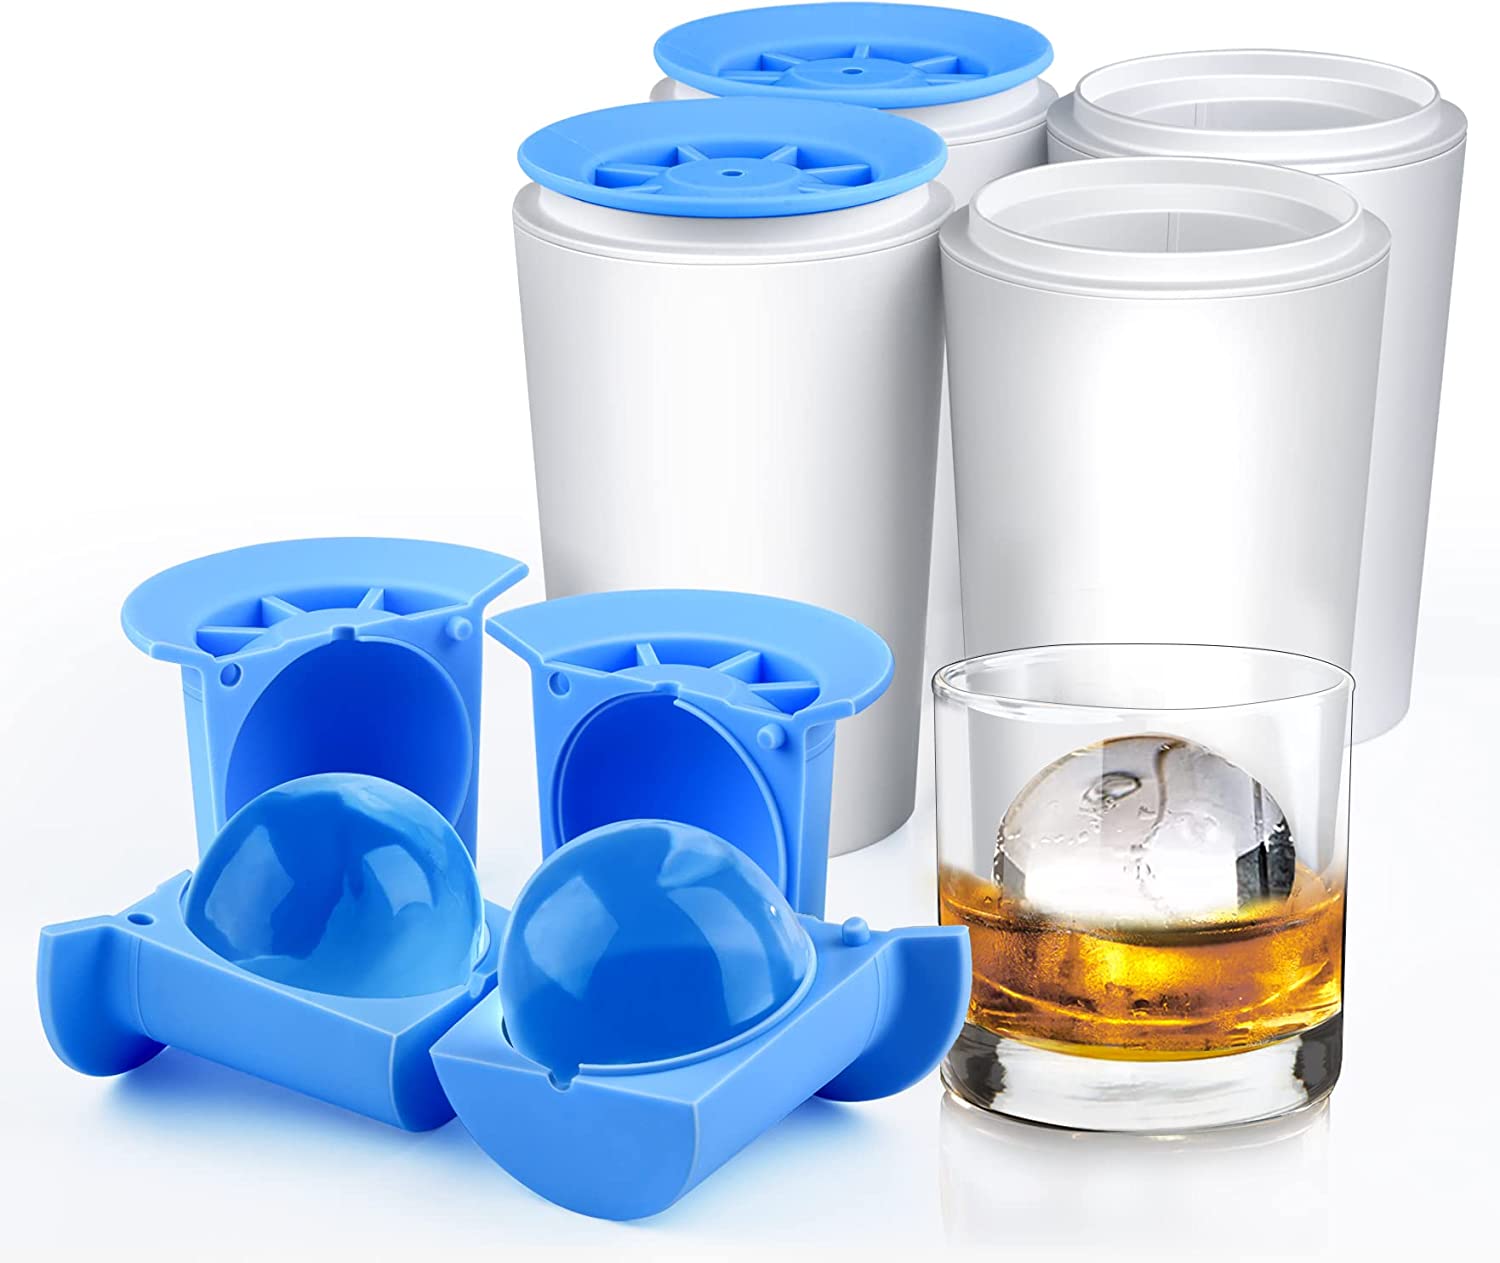  True Cubes Crystal Clear Ice Cube Maker- 4 Large Clear Ice Cubes  for Cocktails, Drinks & Whiskey - BPA-Free Silicone Square Ice Cube Mold -  Whiskey Gifts for Men: Home 